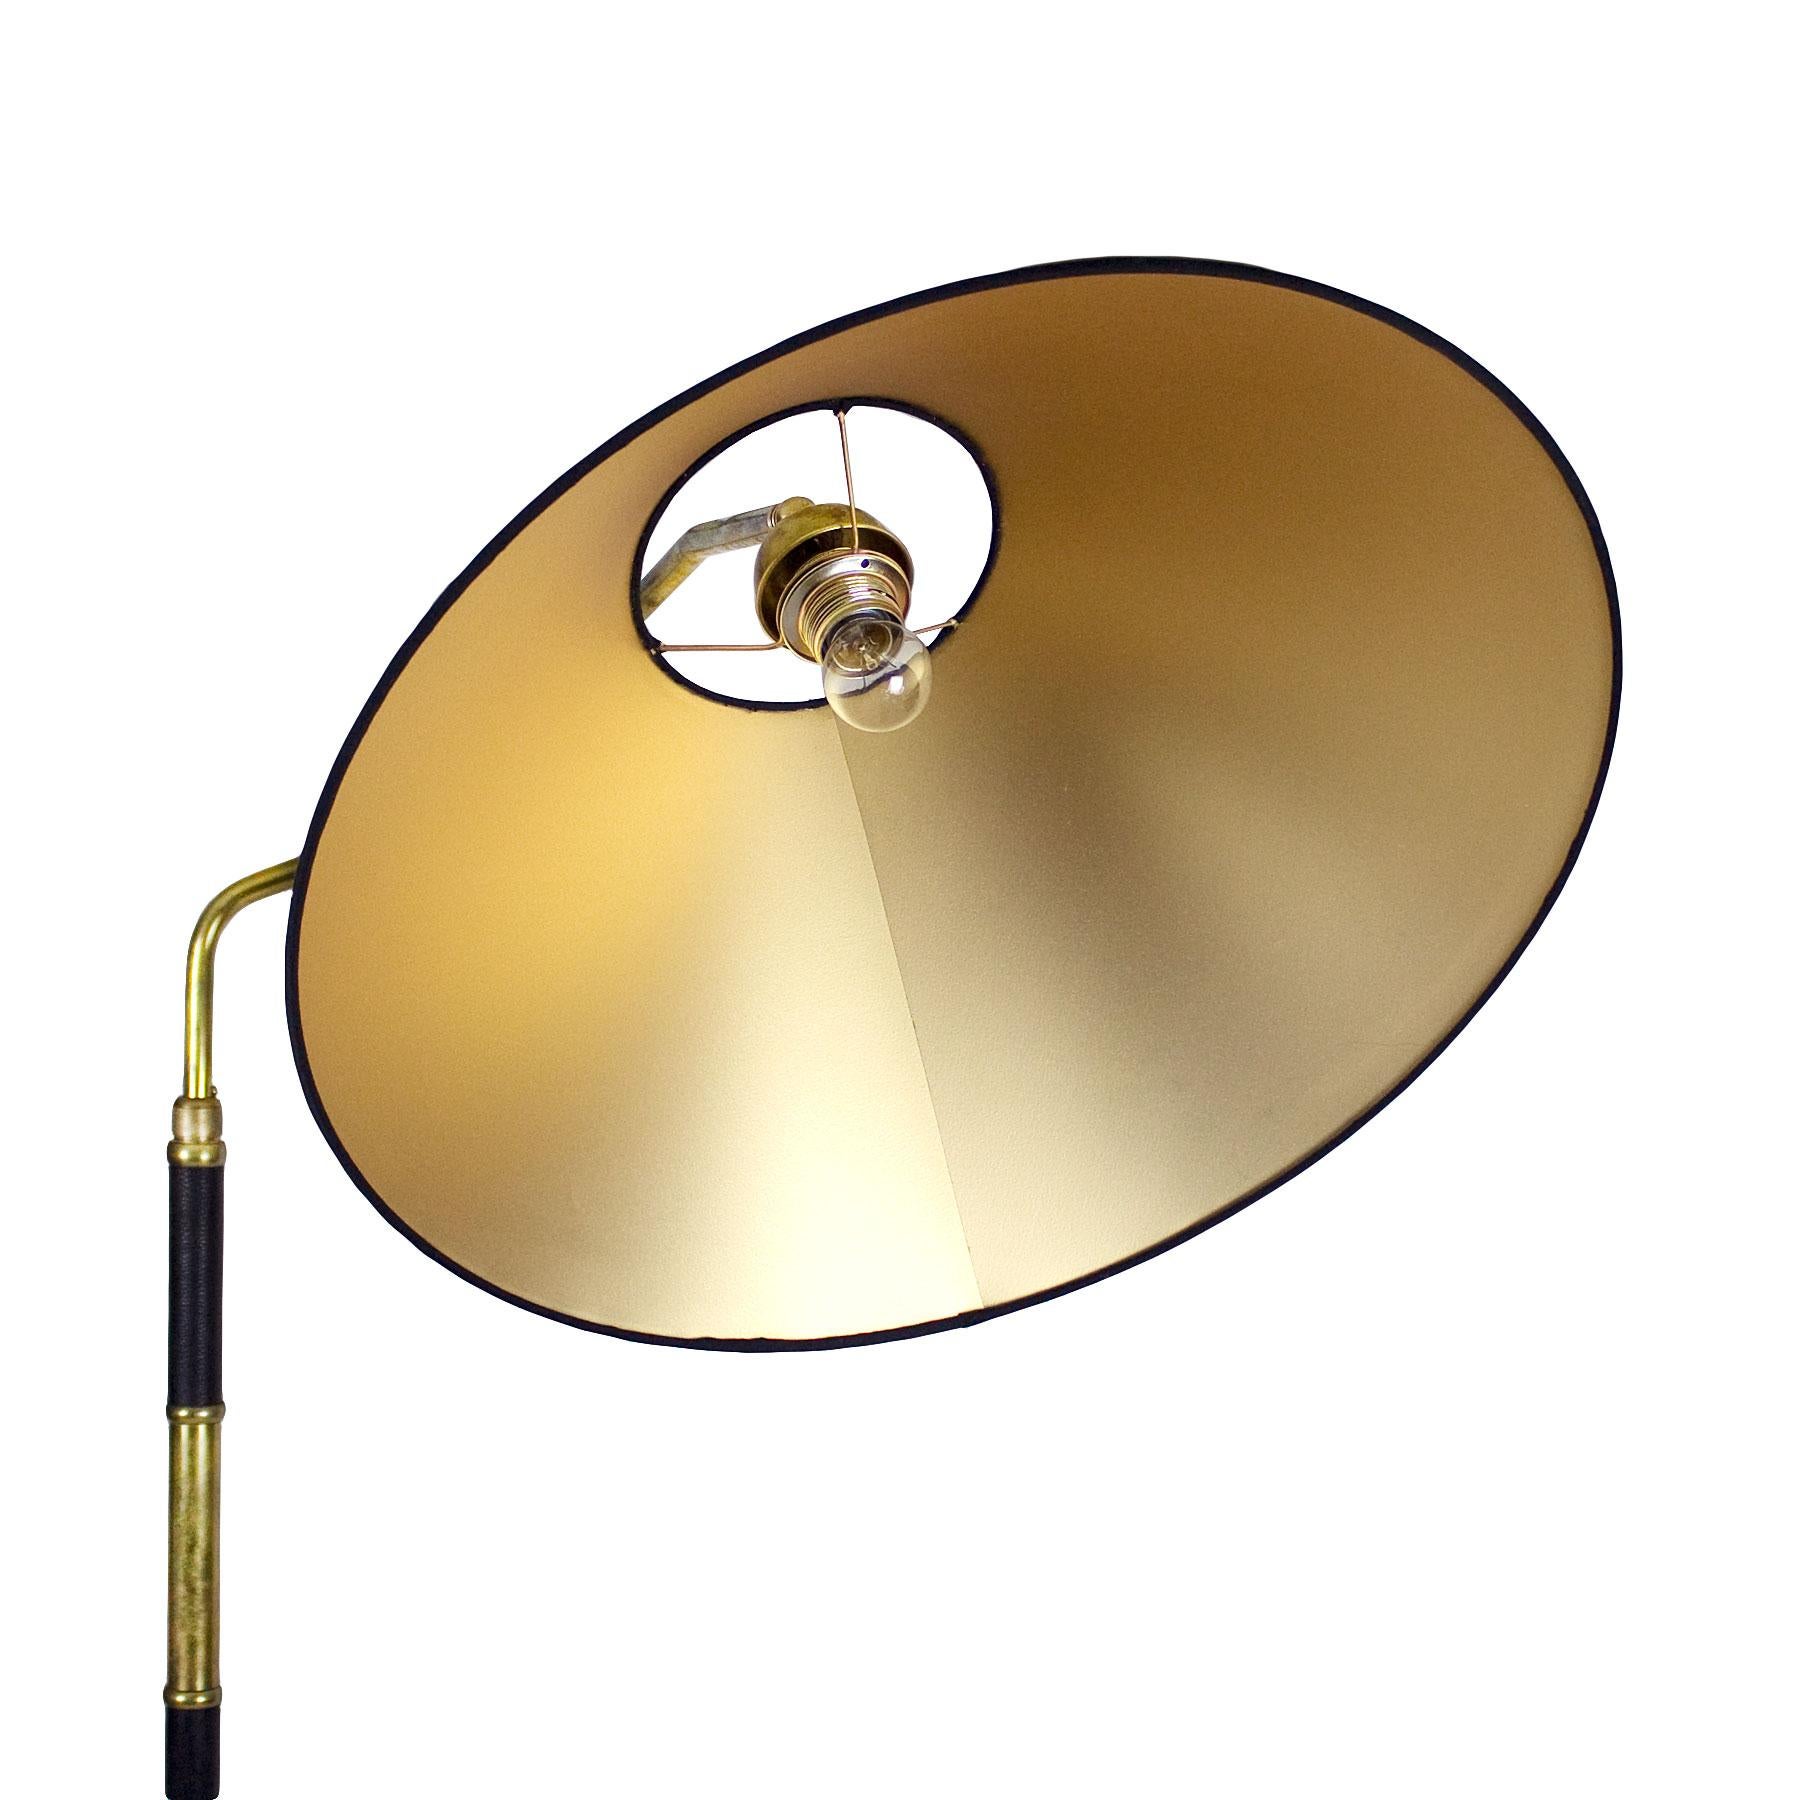 Mid-Century Modern System Standing Lamp, Polished Brass and Leather - Italy For Sale 4